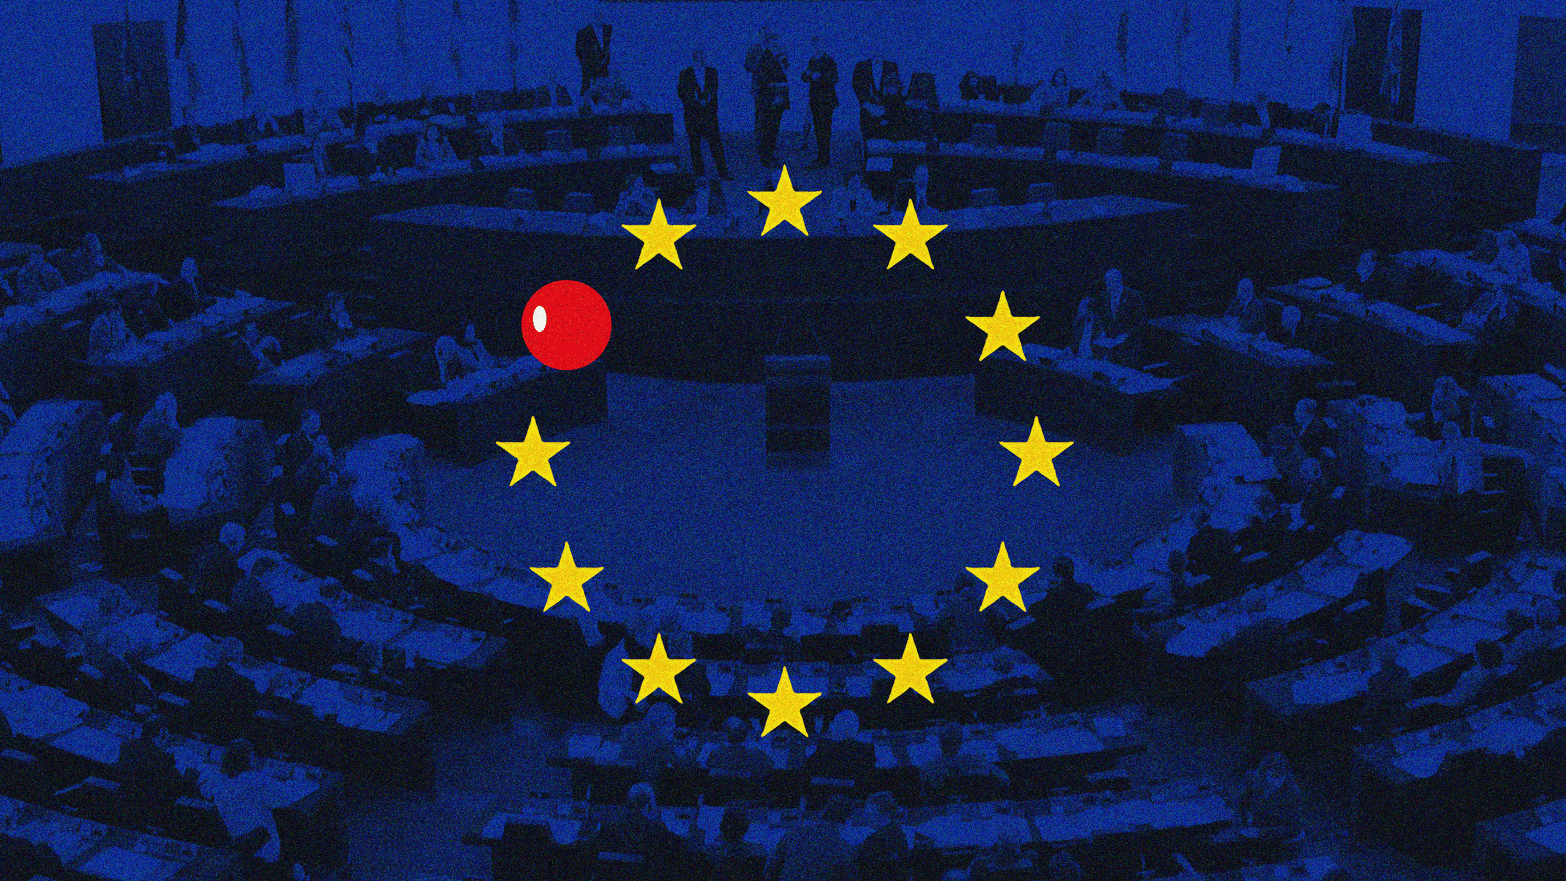 An image of the European Union flag with a red spy blinking light over an image of the European Parliament.